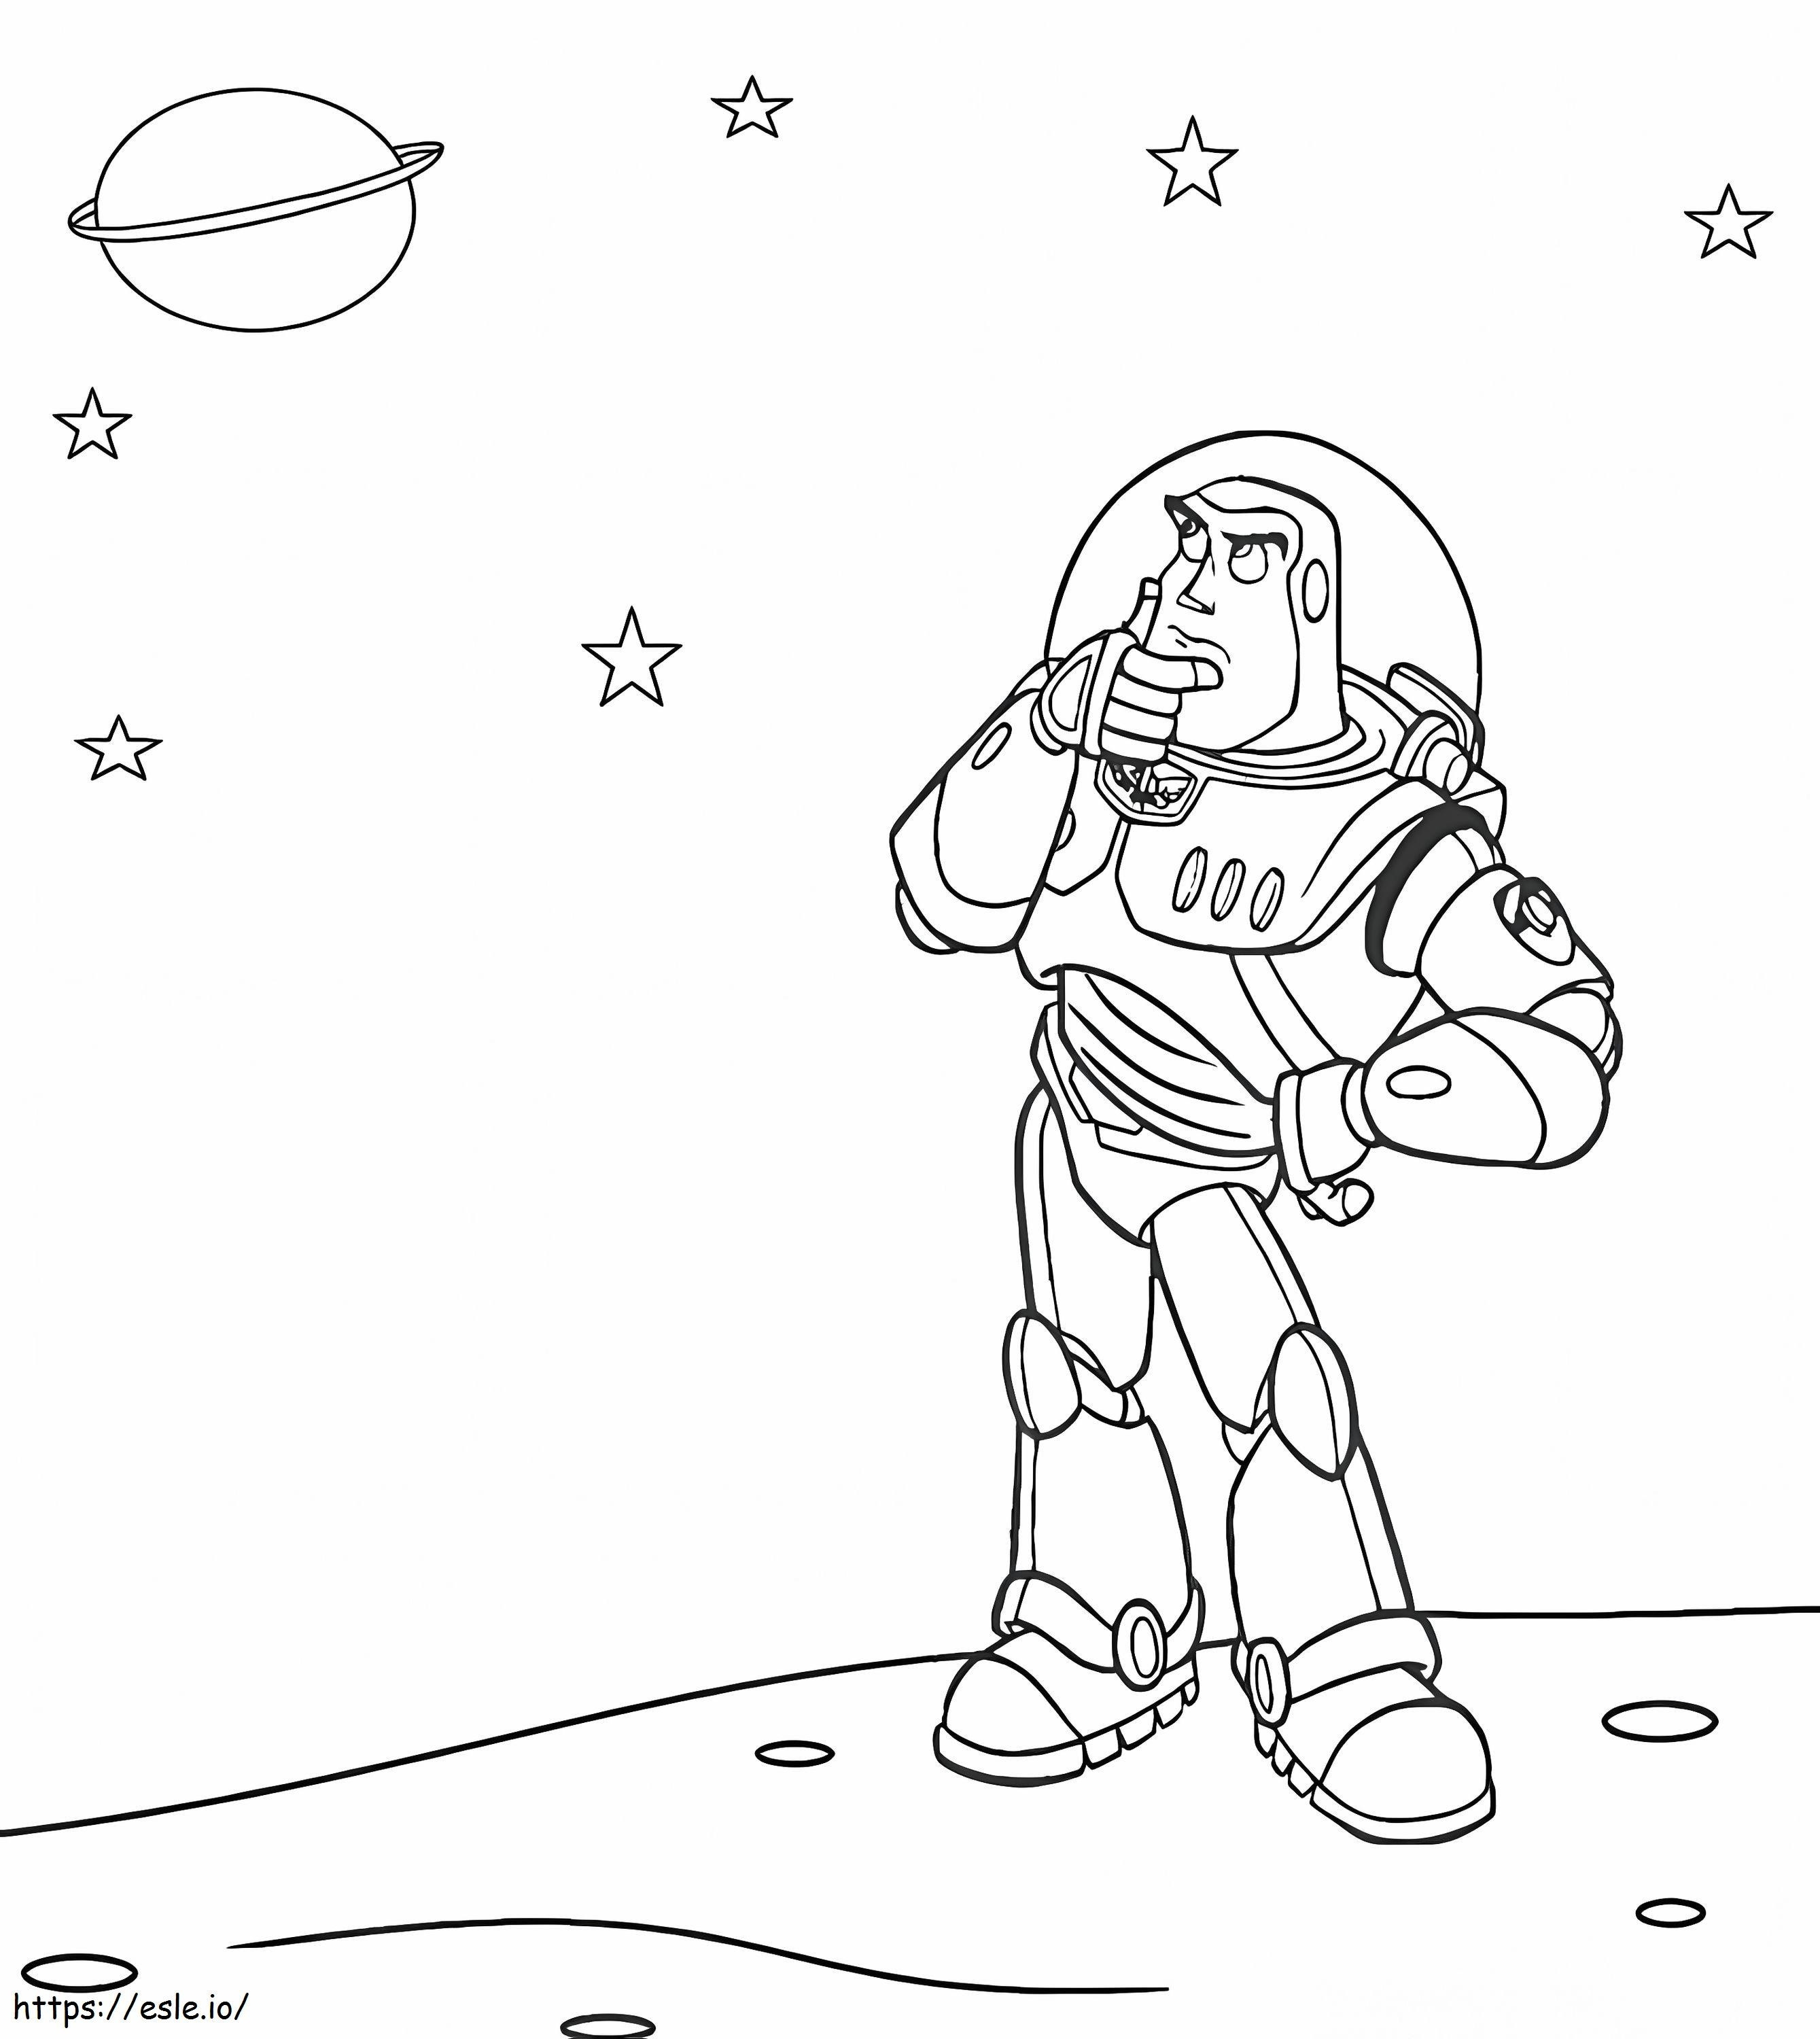 Buzz Lightyear On The Planet coloring page